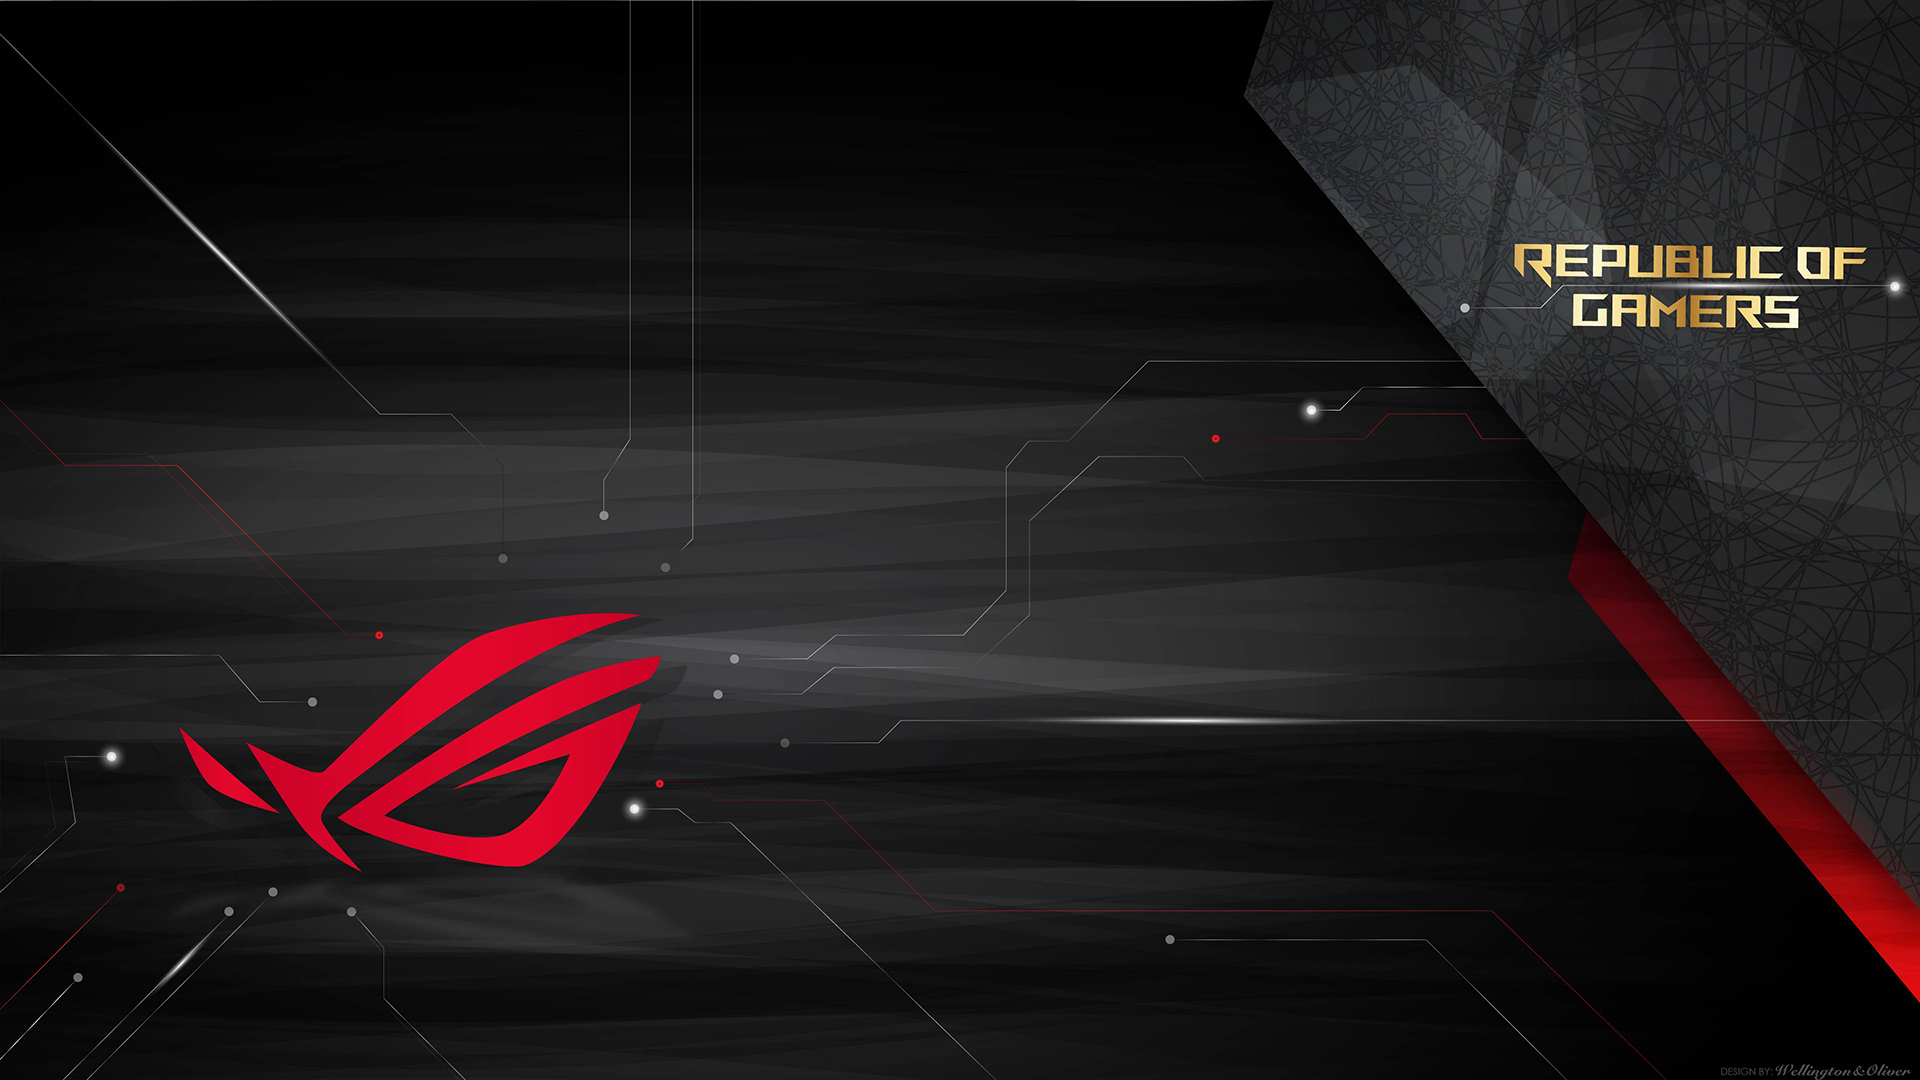 ASUS ROG themed